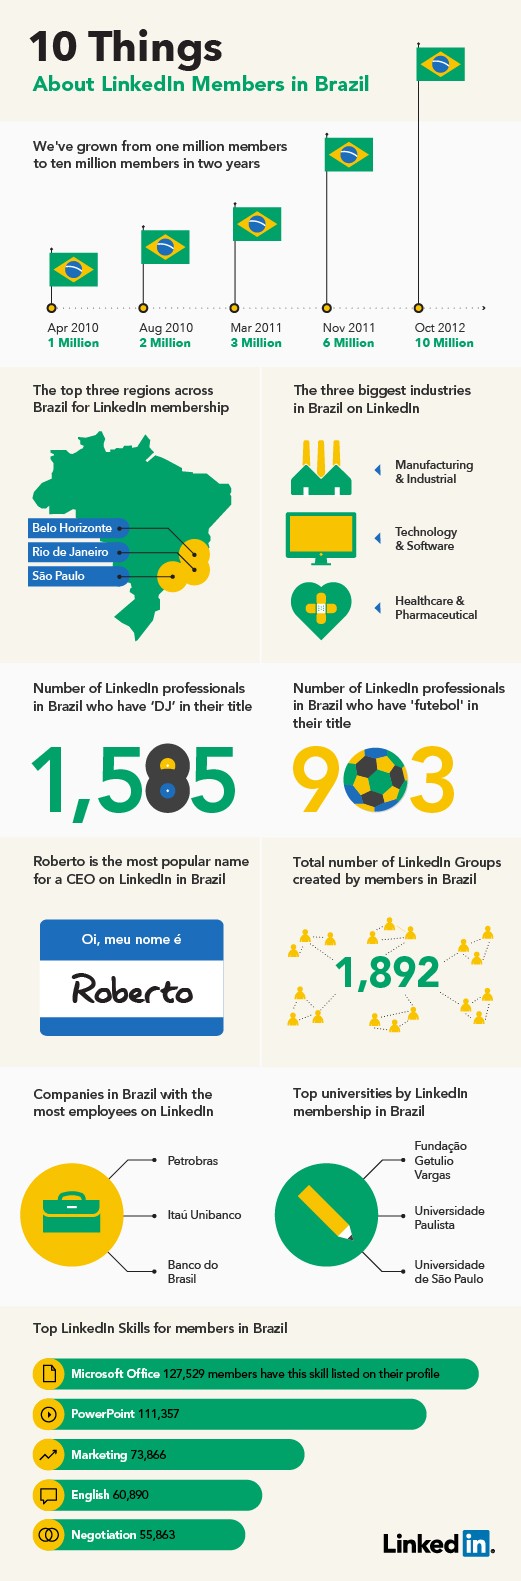 Ten Things About LinkedIn Members in Brazil Infographic